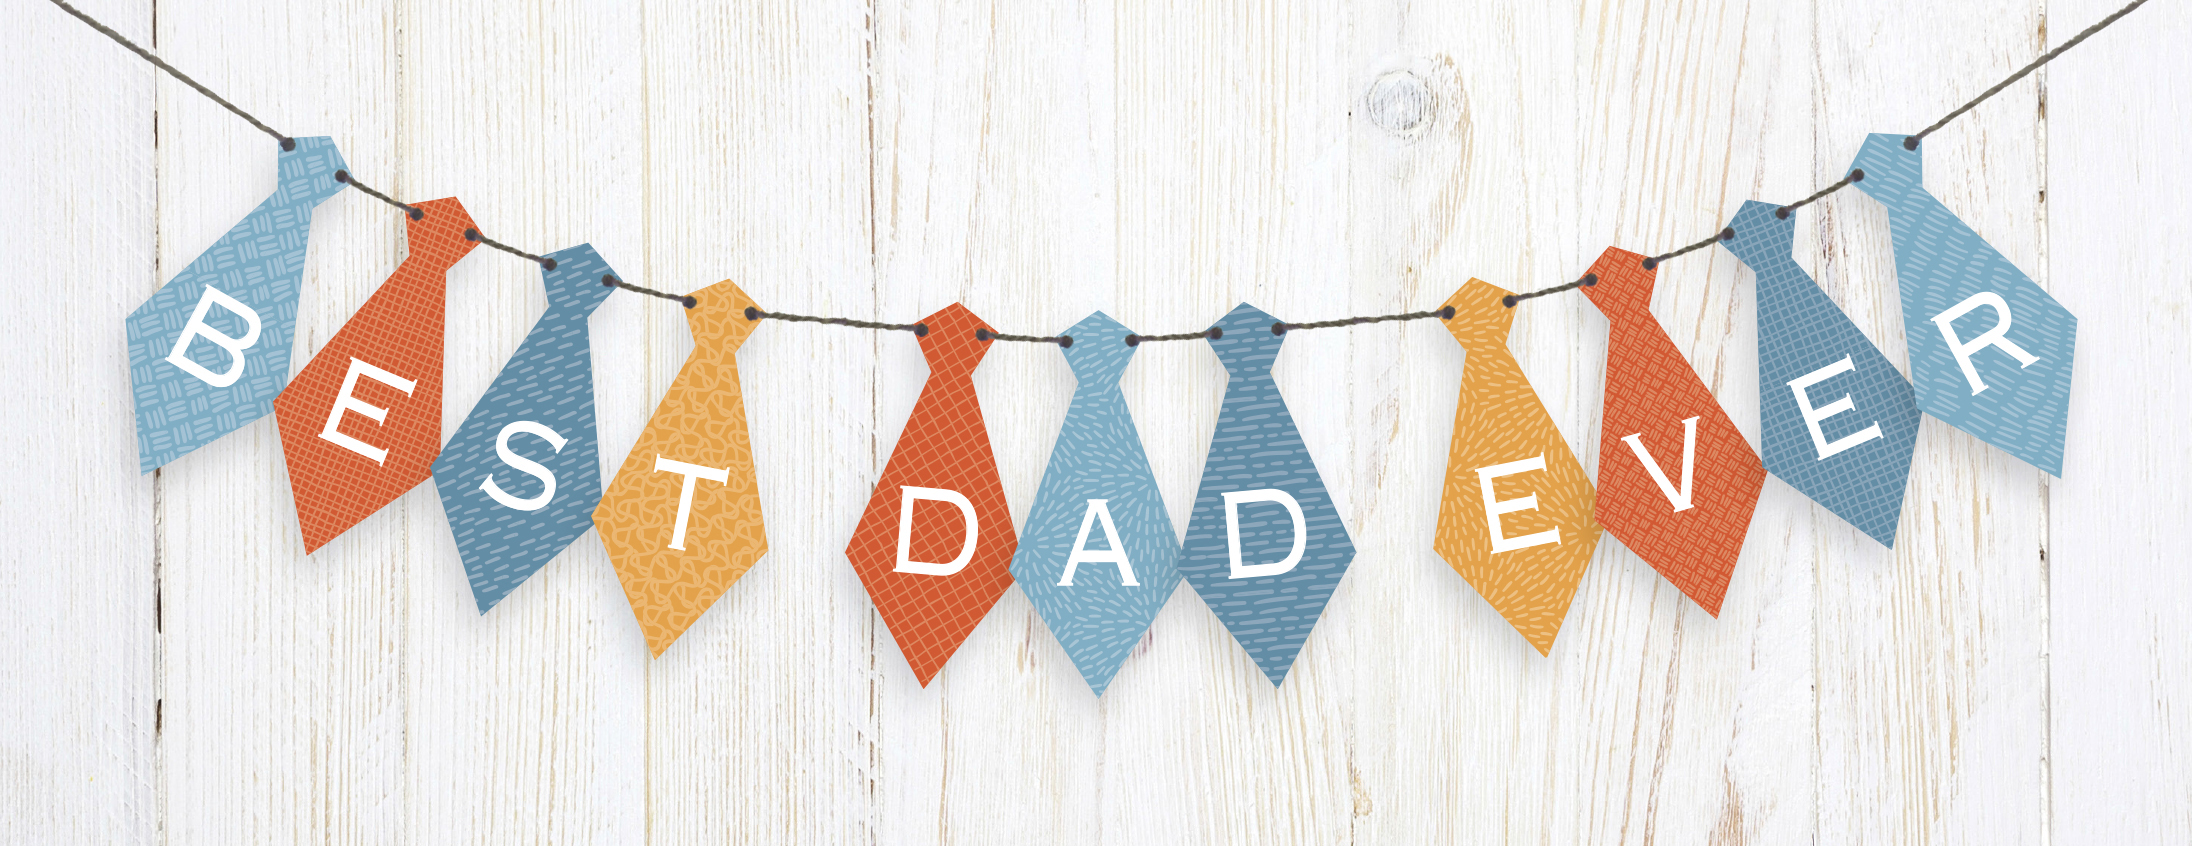 Father's Day free banner printable